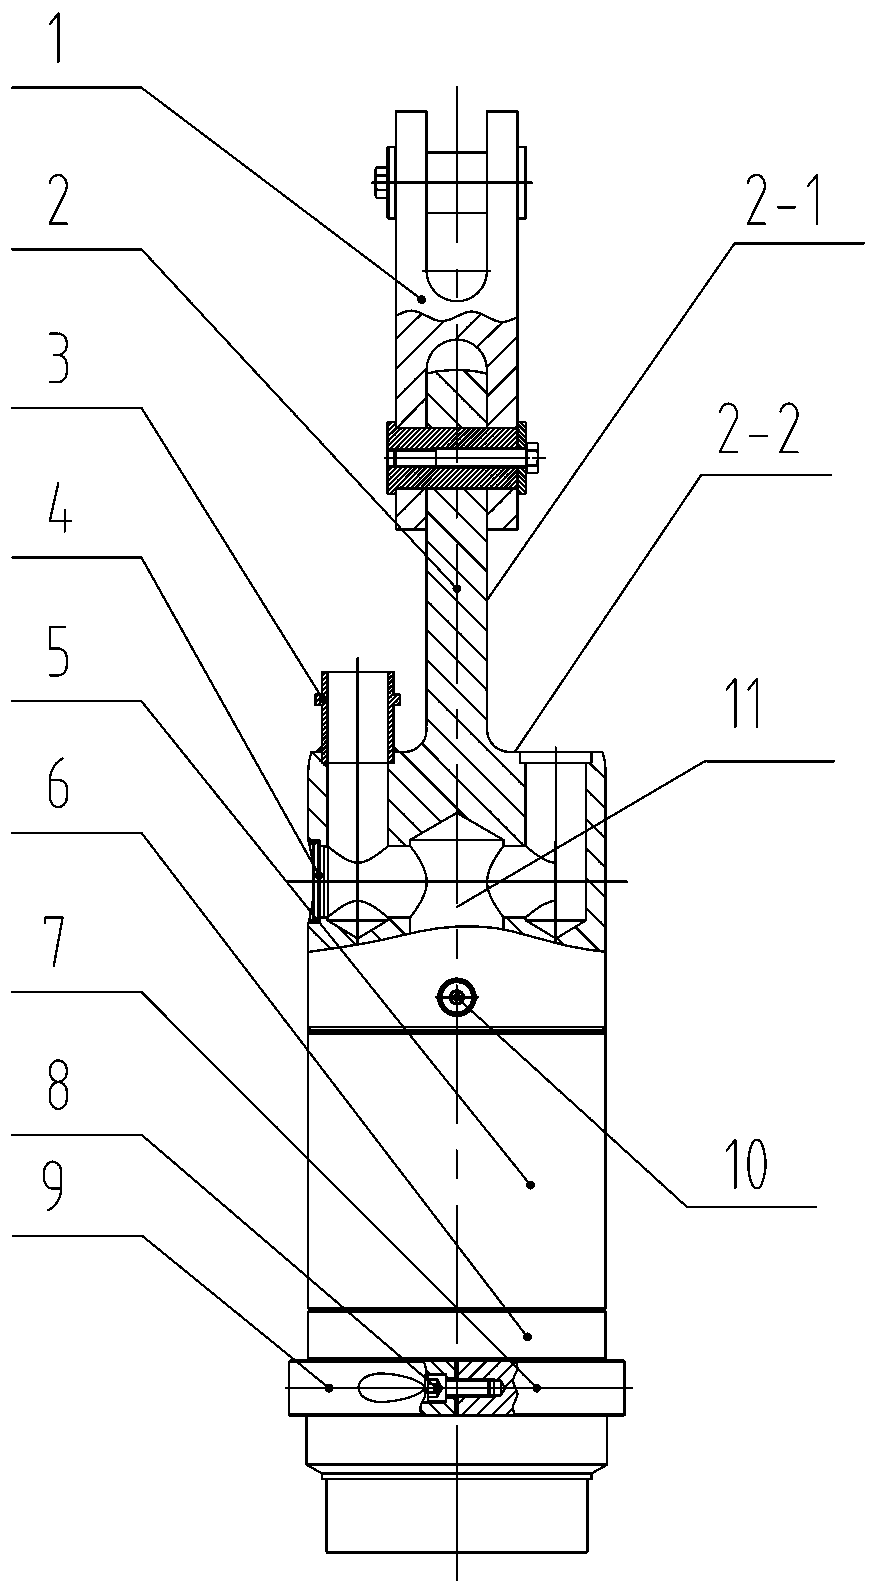 Rotary drilling rig elevator with gas transmission channel therein